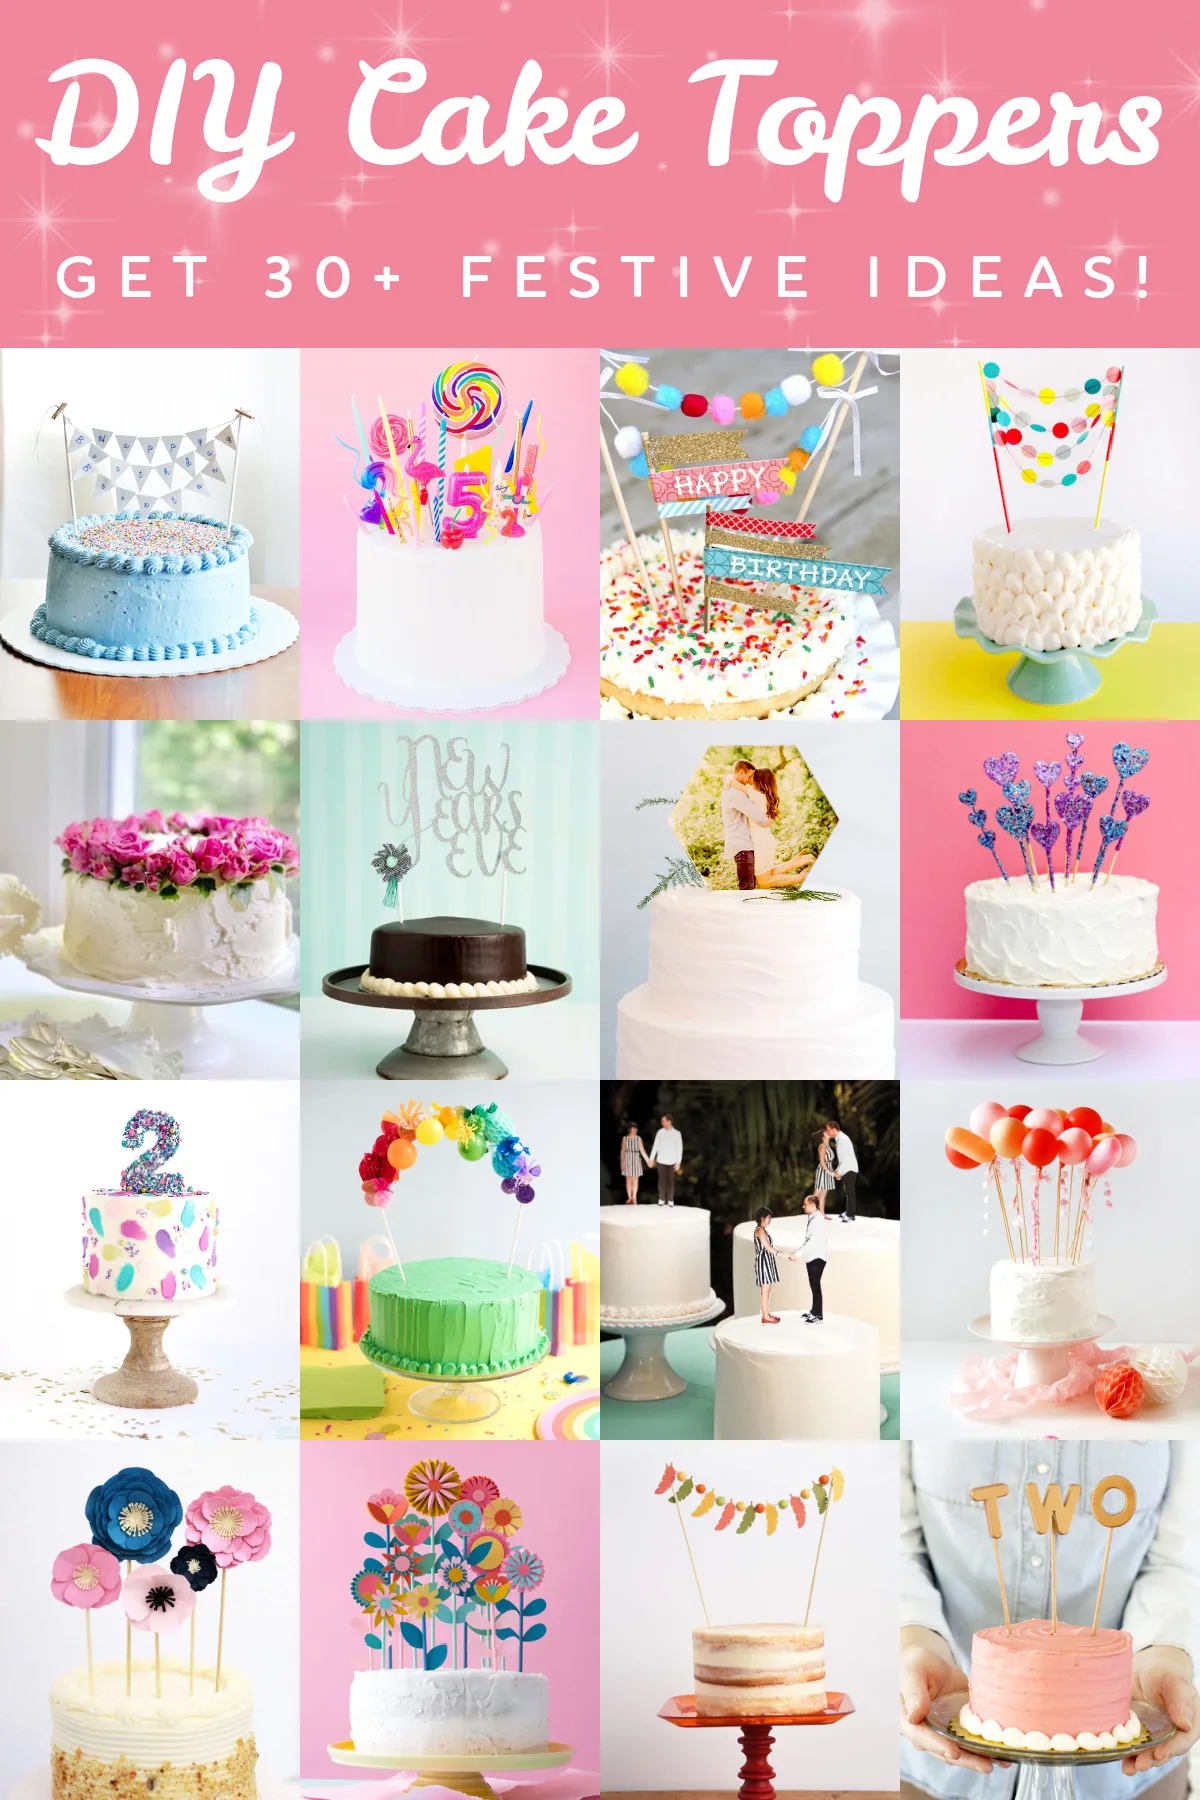 Create an Edible Cake Pennant Banner - Delineate Your Dwelling